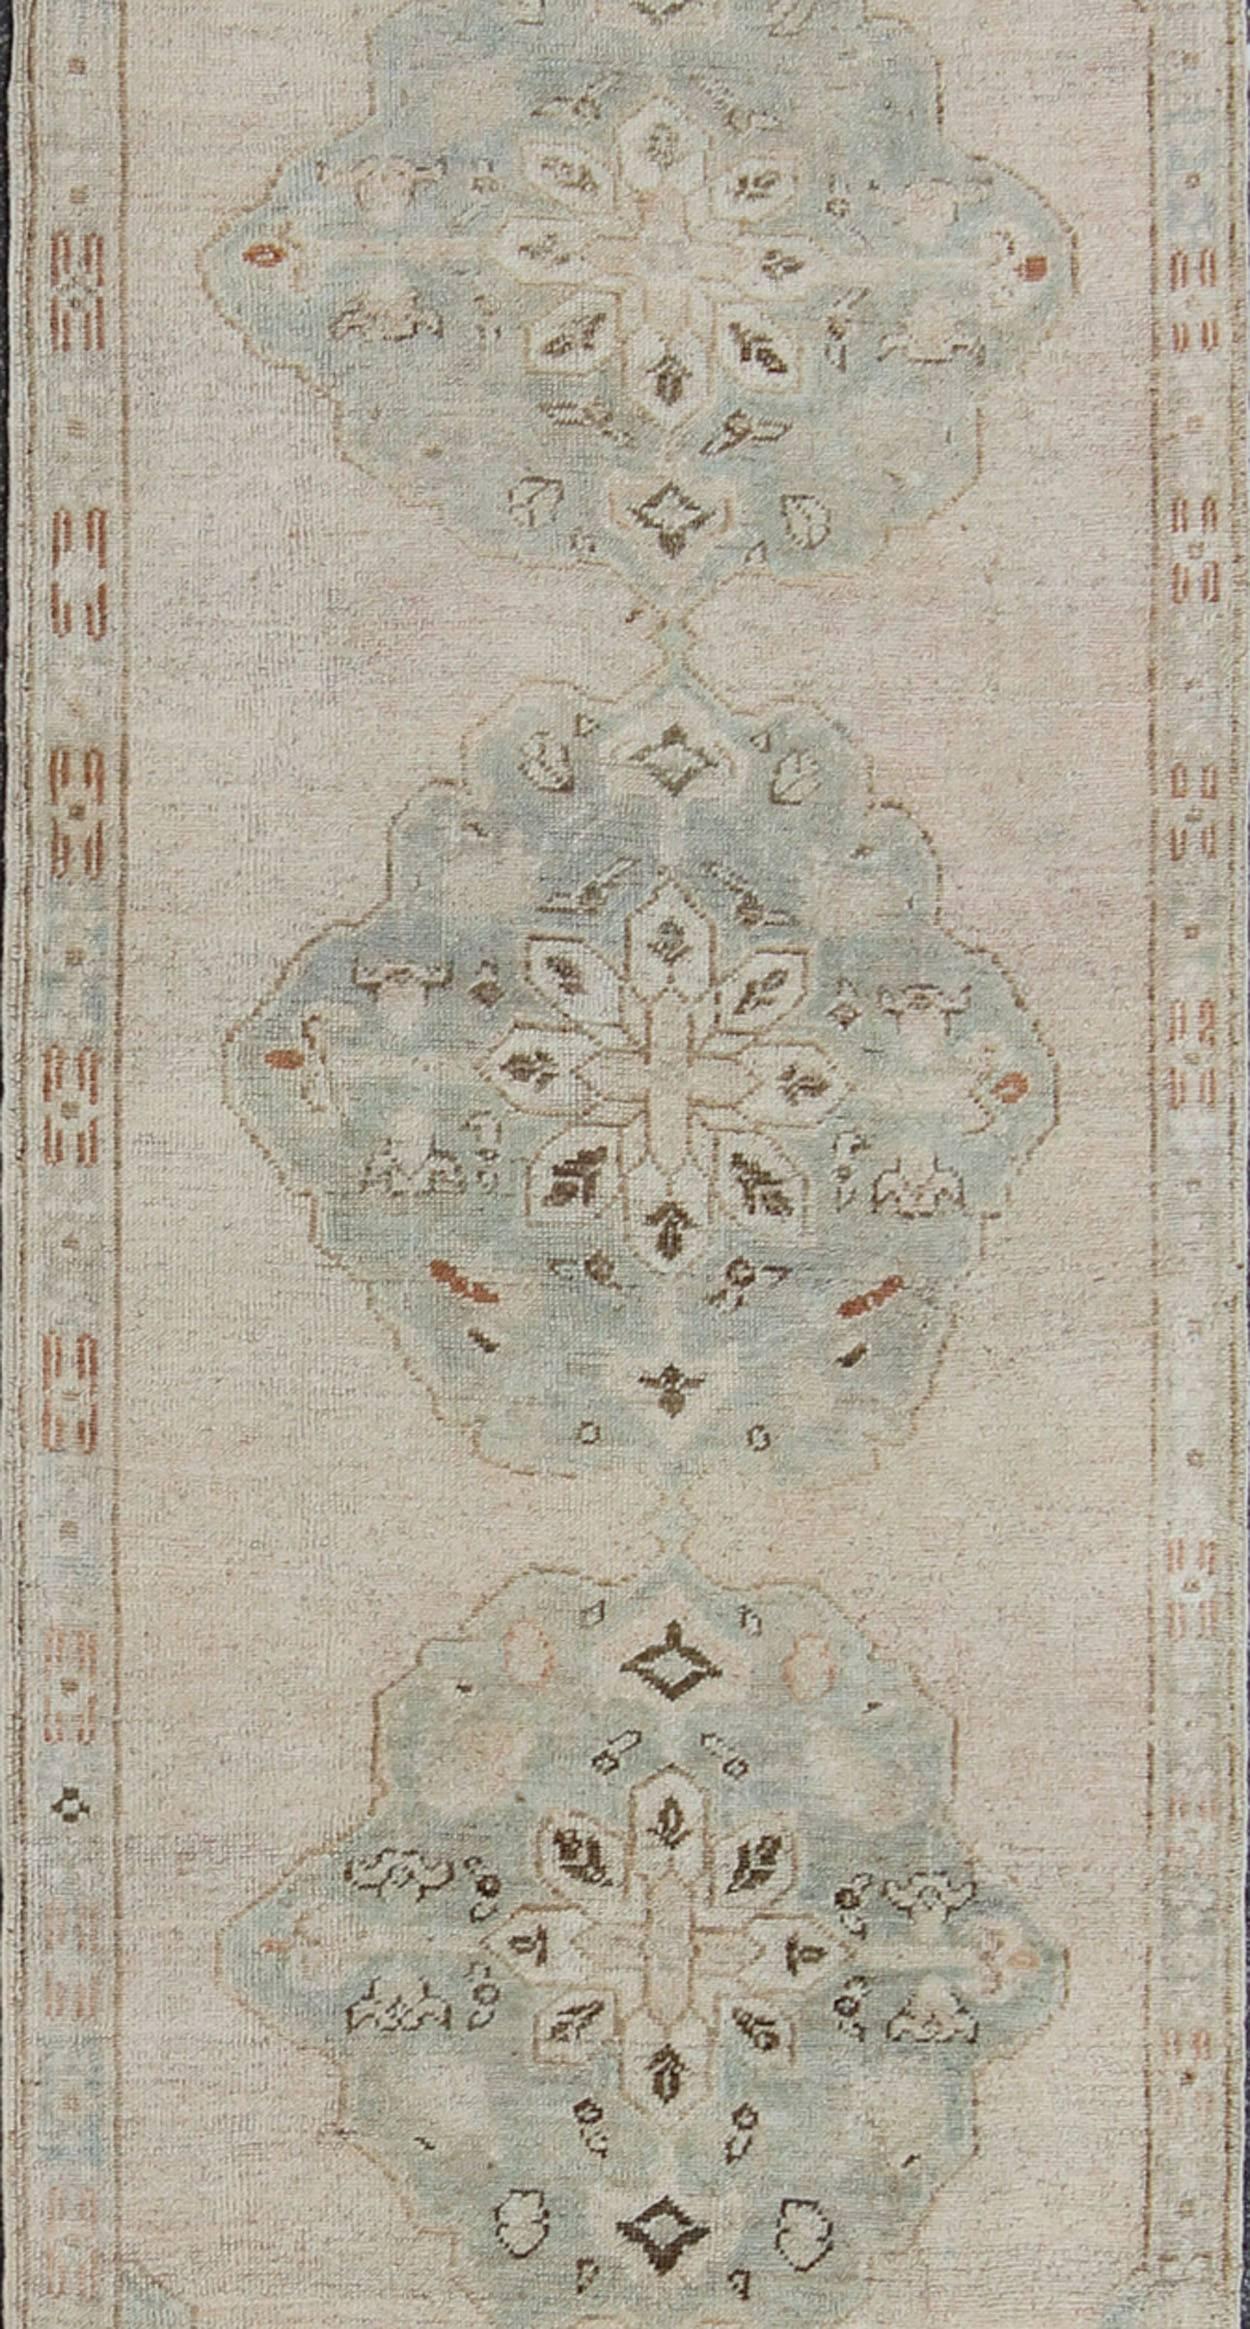 Hand-Knotted Vintage Oushak Runner in Sea-Foam Green and Blue with Medallion Design